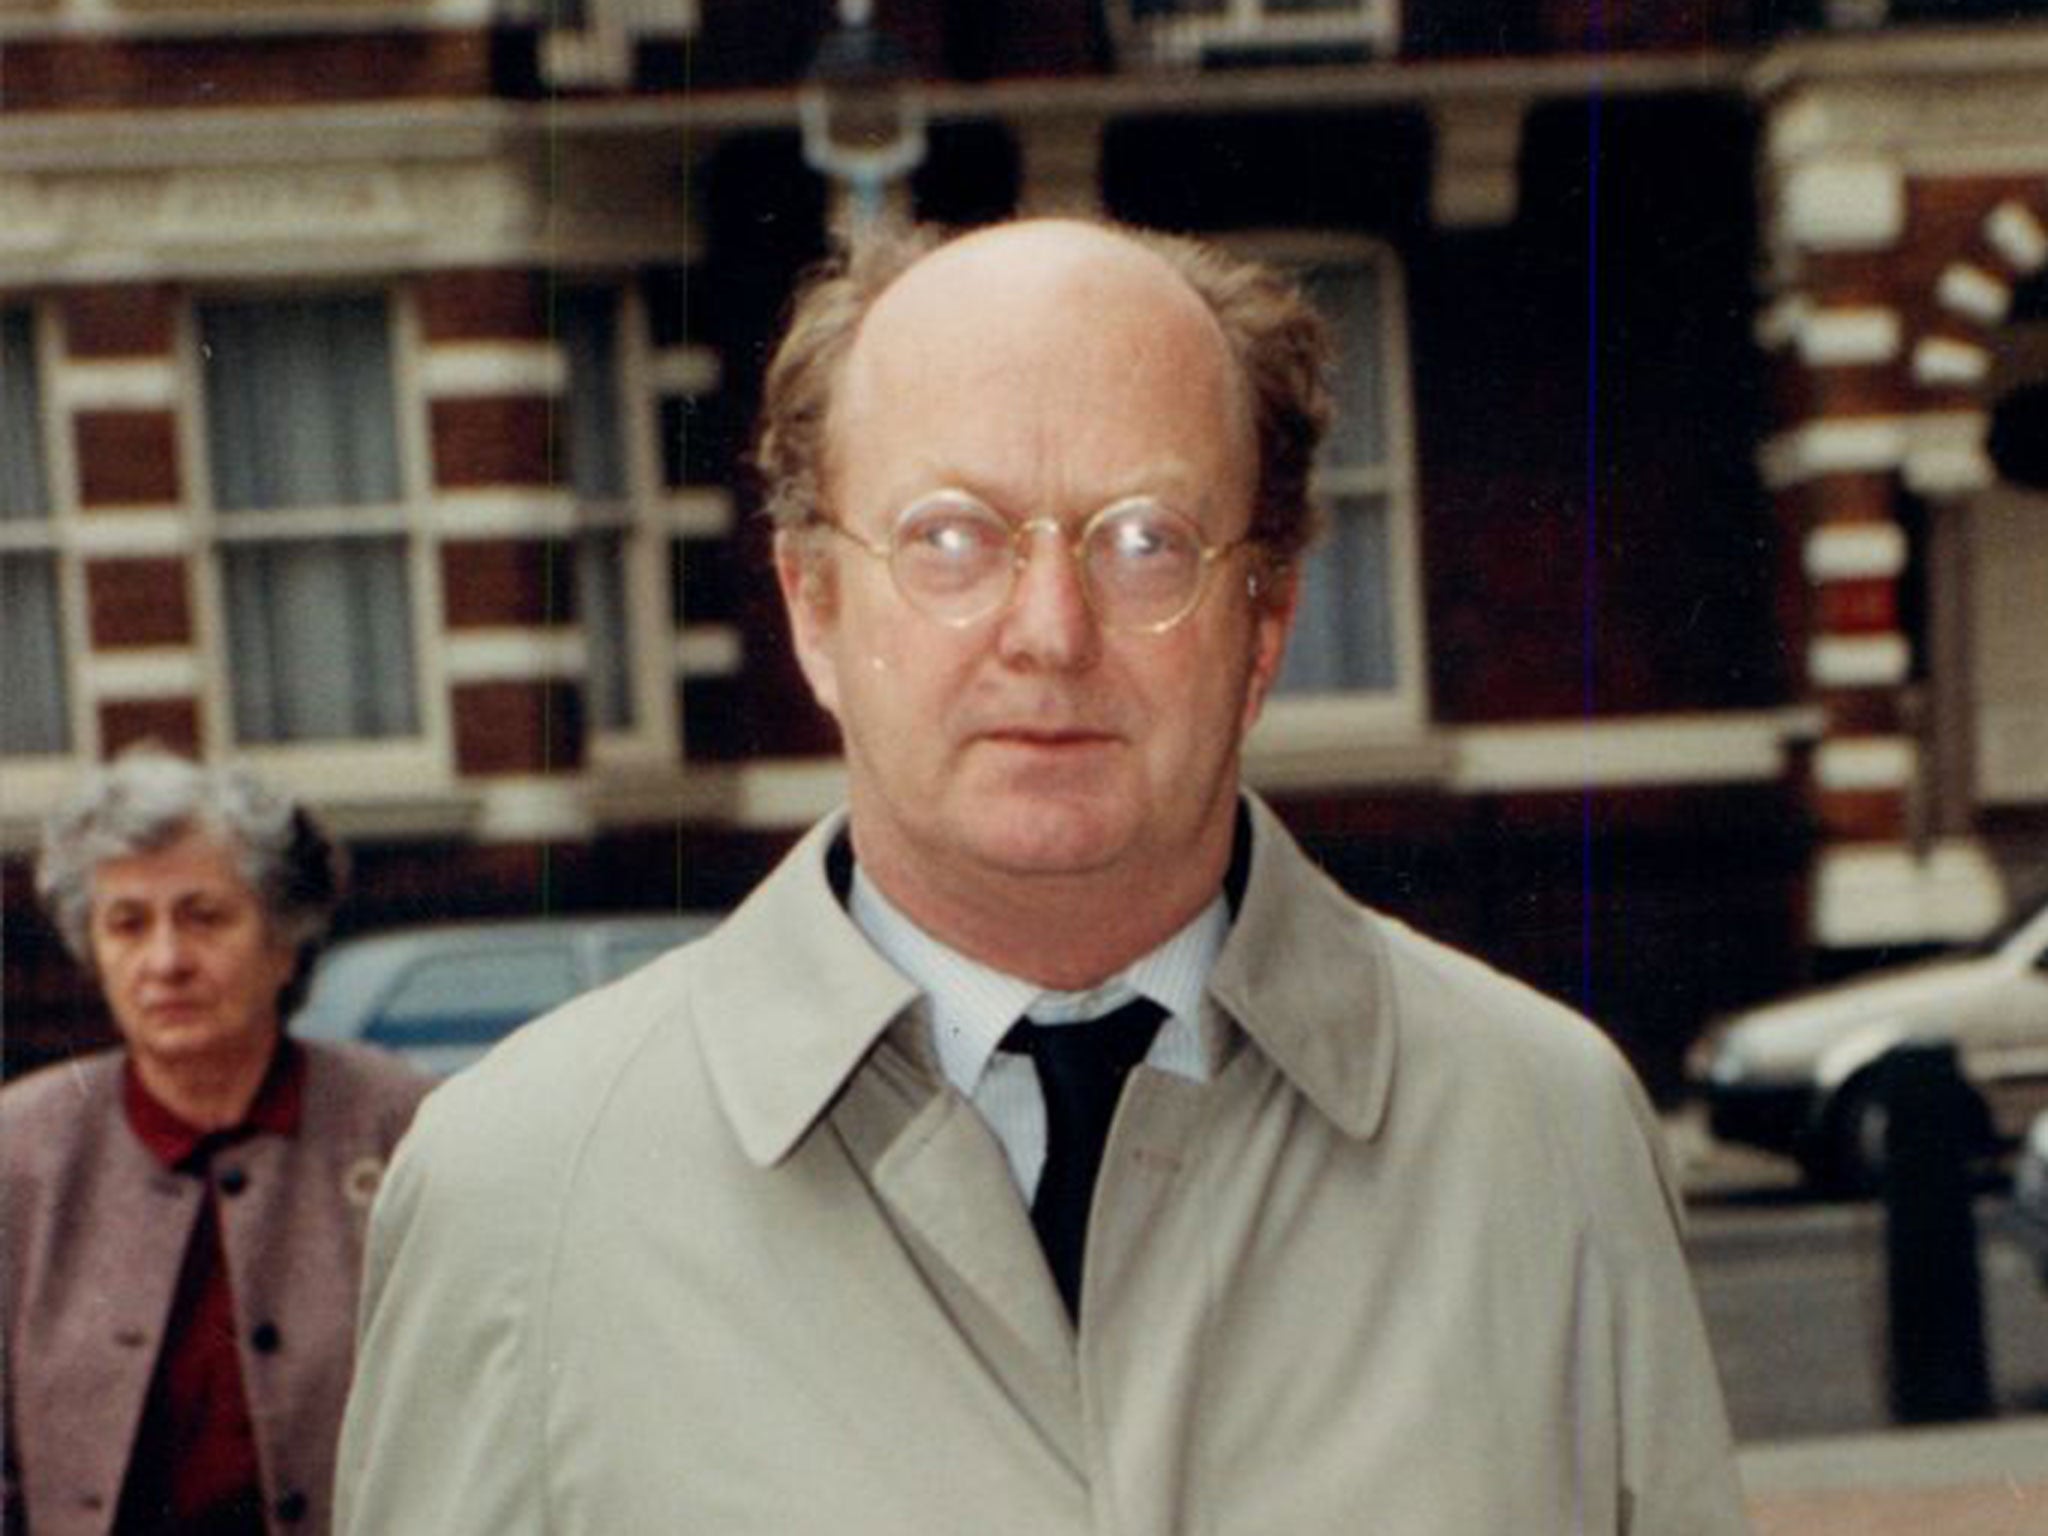 Auberon Waugh stood against Jeremy Thorpe on behalf of a single-candidate pressure group called the Dog Lovers’ Party